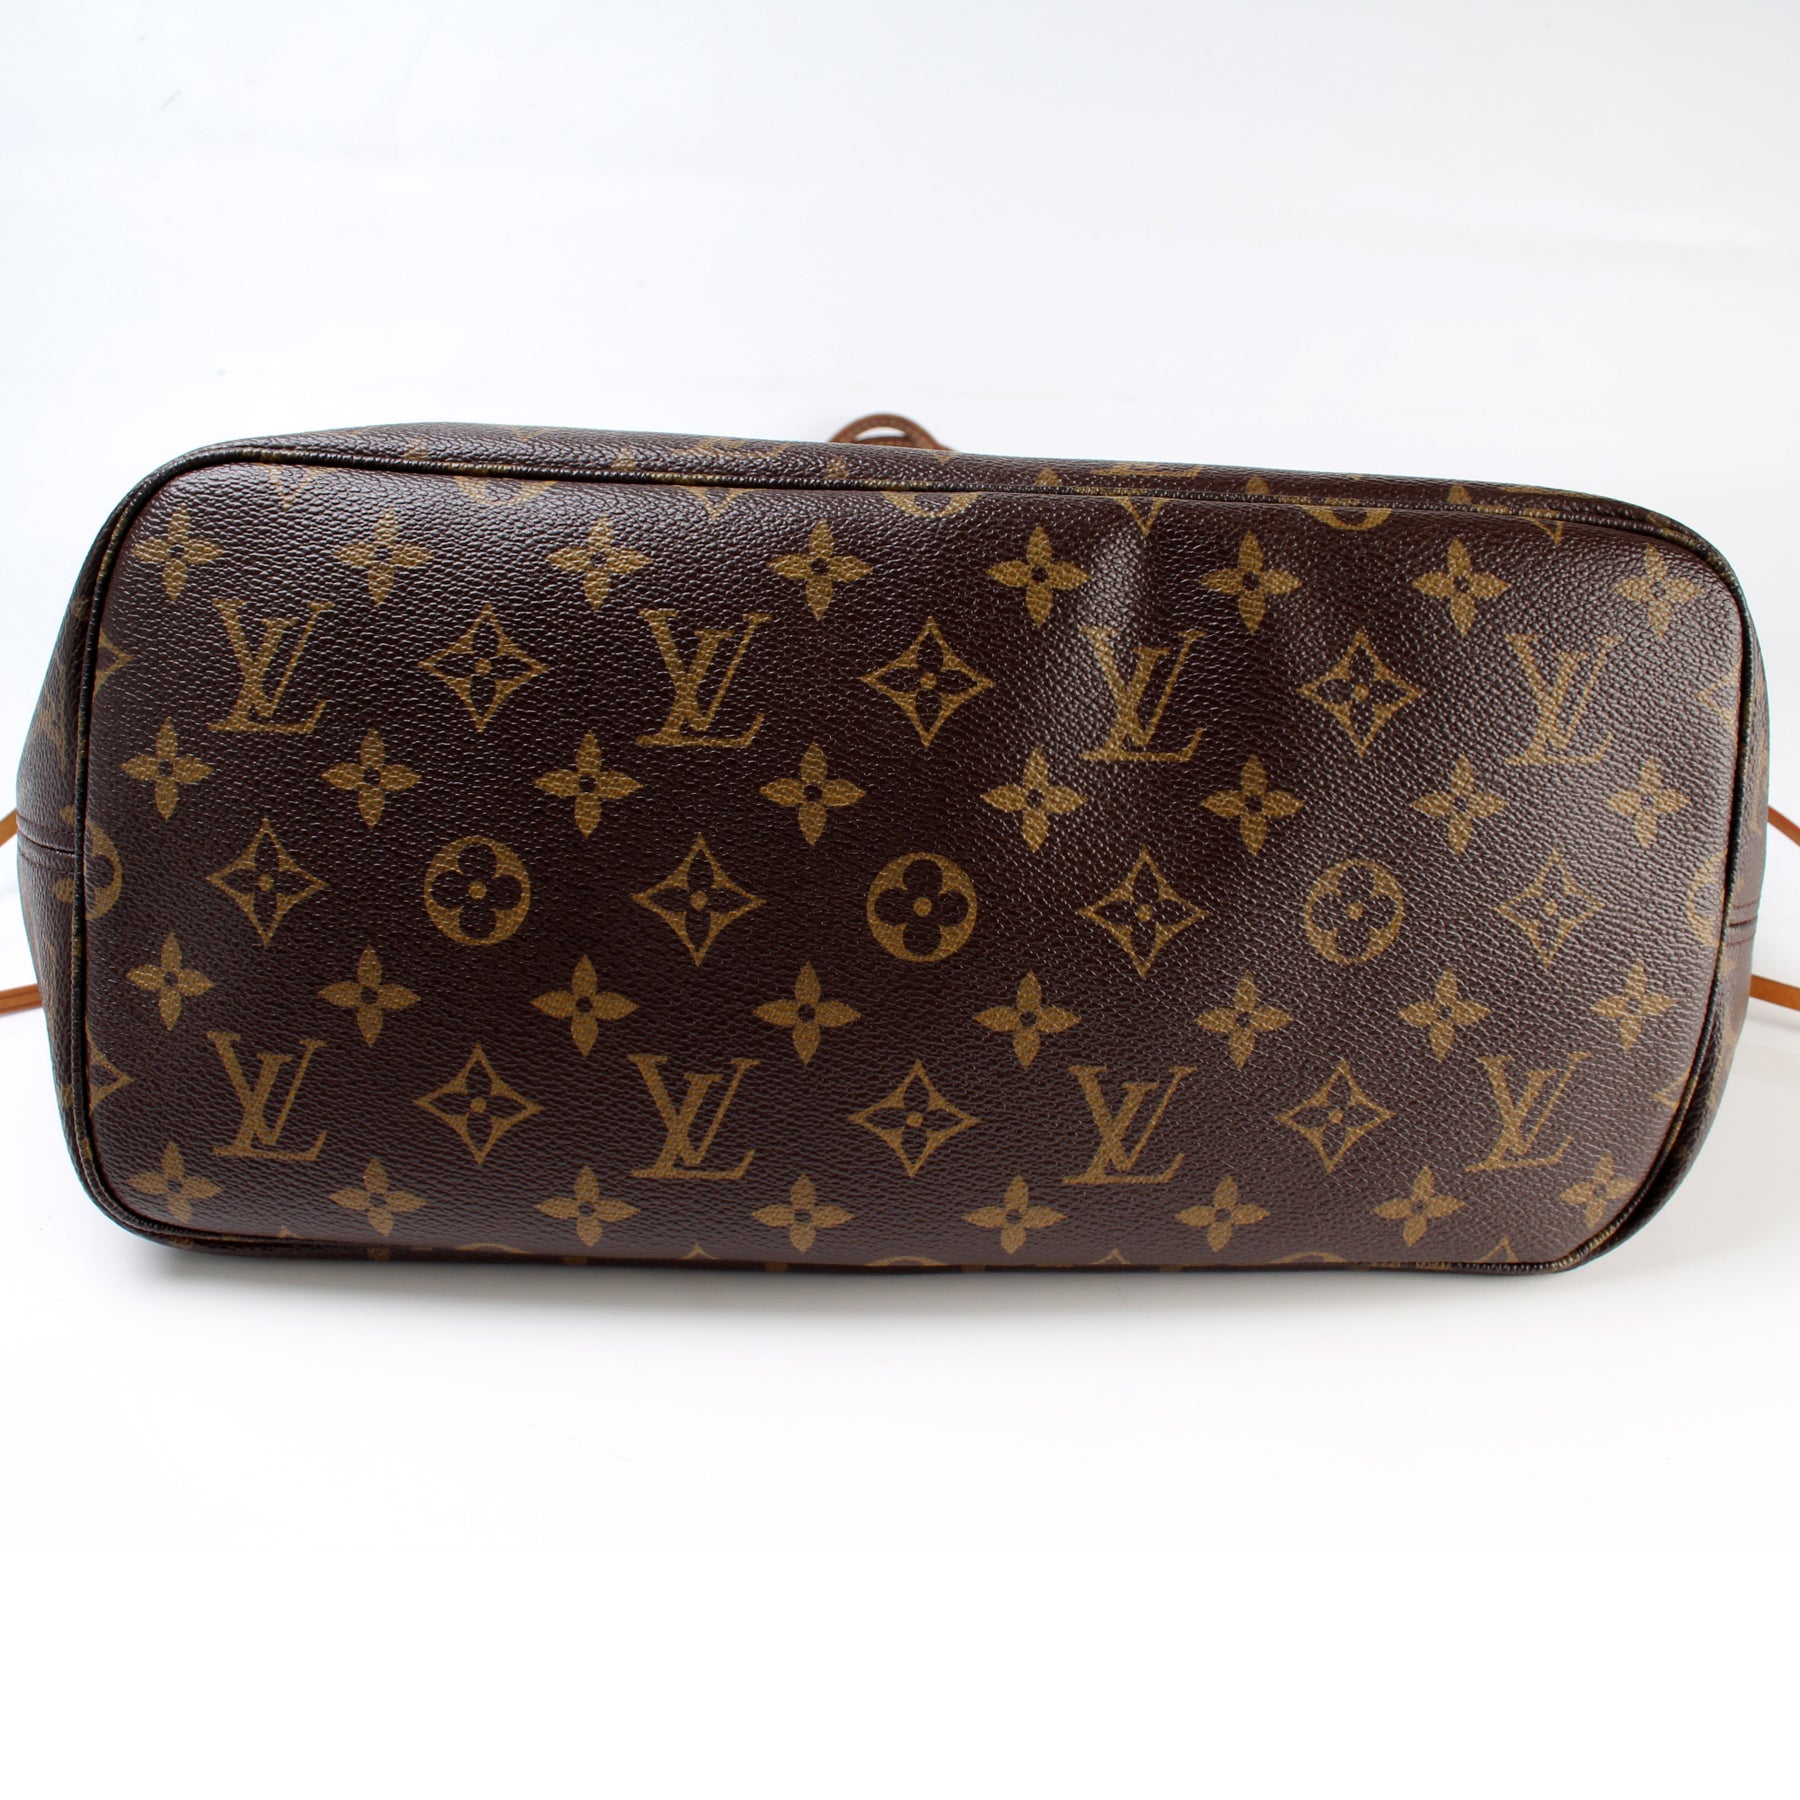 Pre-loved Louis Vuitton classic canvas Neverfull MM tote - AR5017